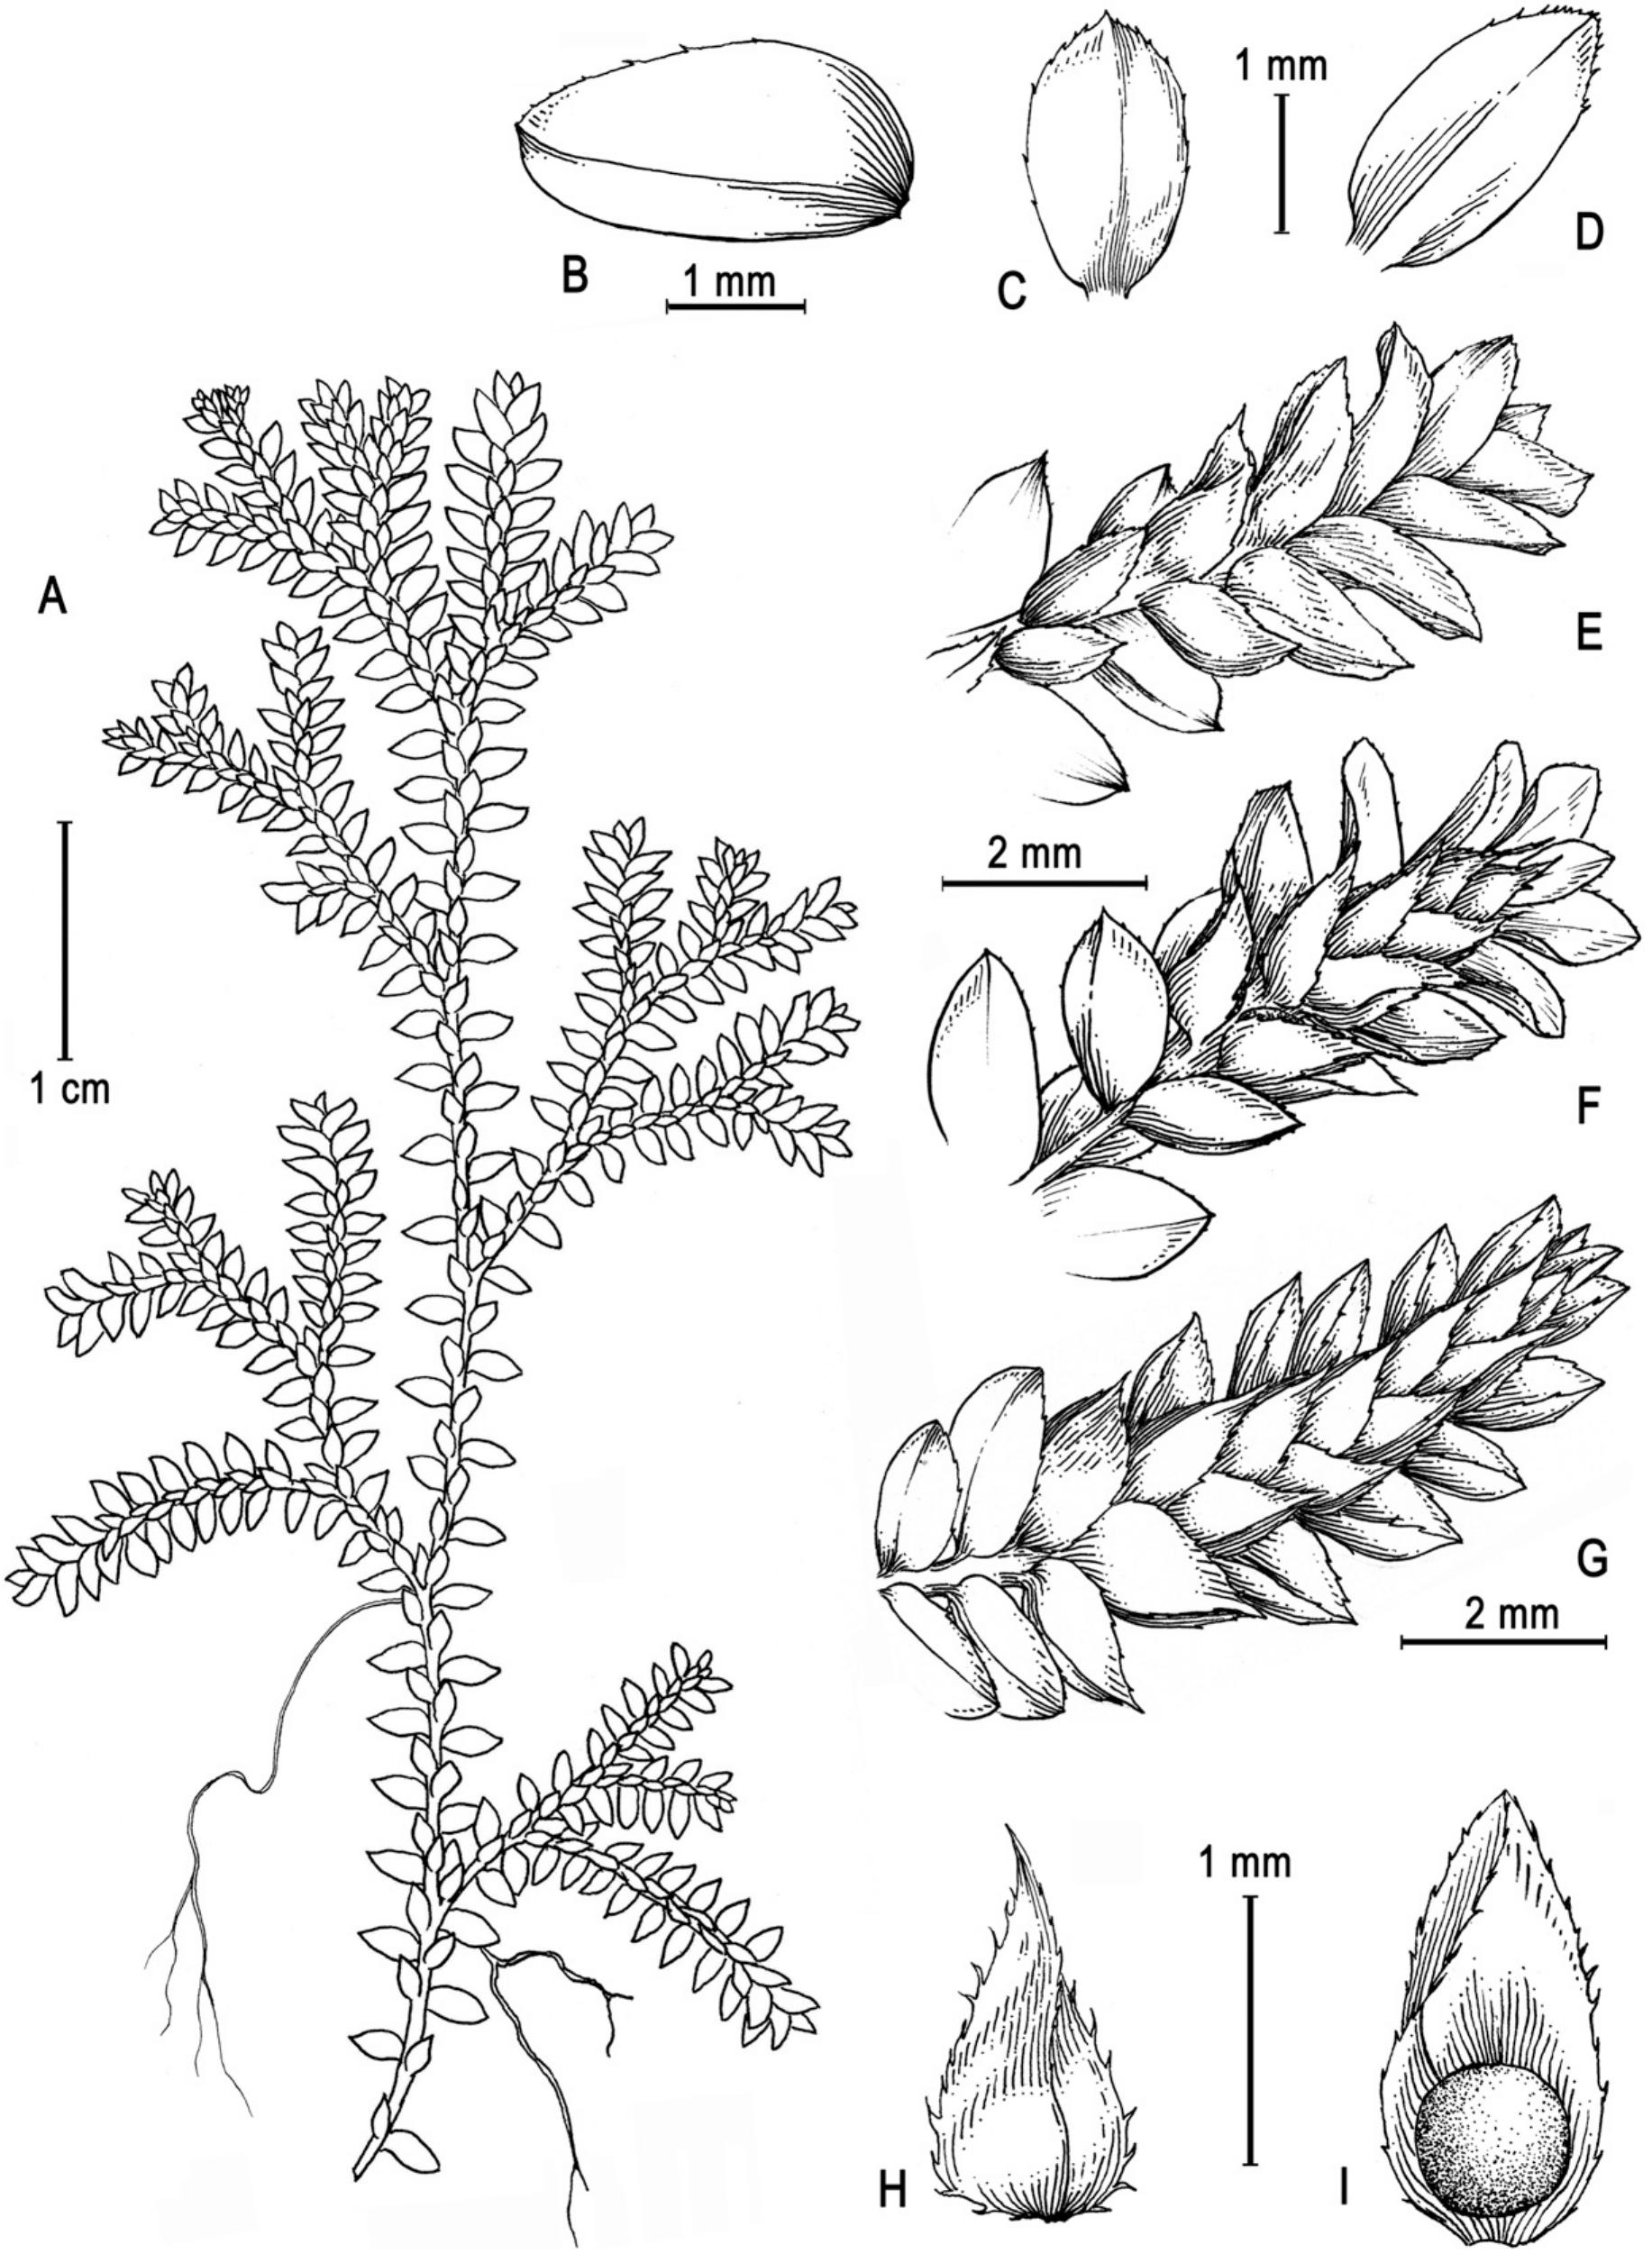 Two New Species of the Lycophyte Genus Selaginella 